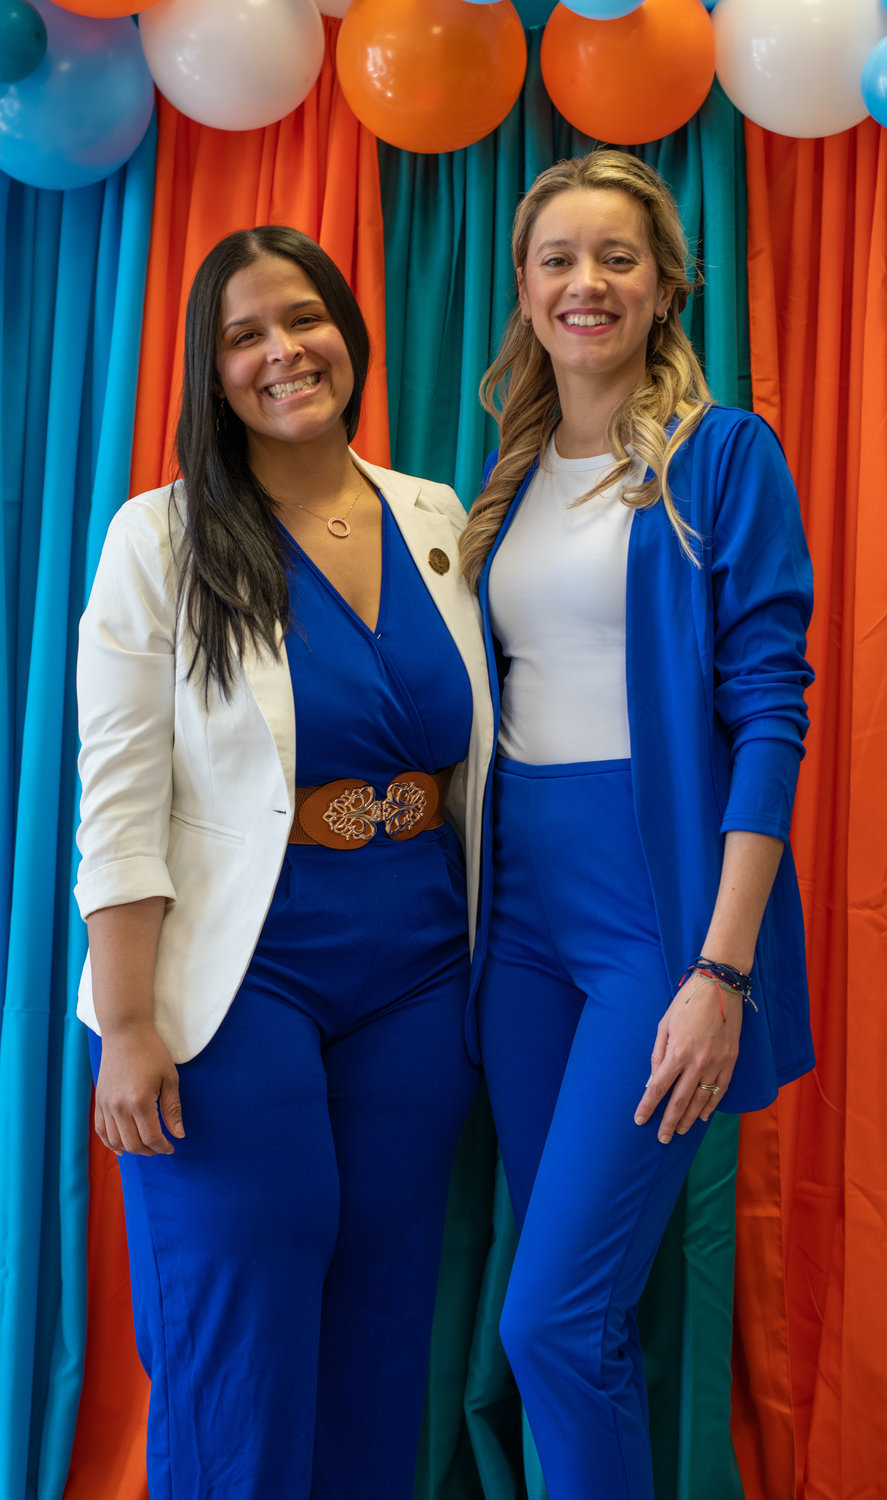 Lucy Nunnery and Juliana Baca Roman, owners of Viva Hydration, pose at the grand opening of the business last Saturday.